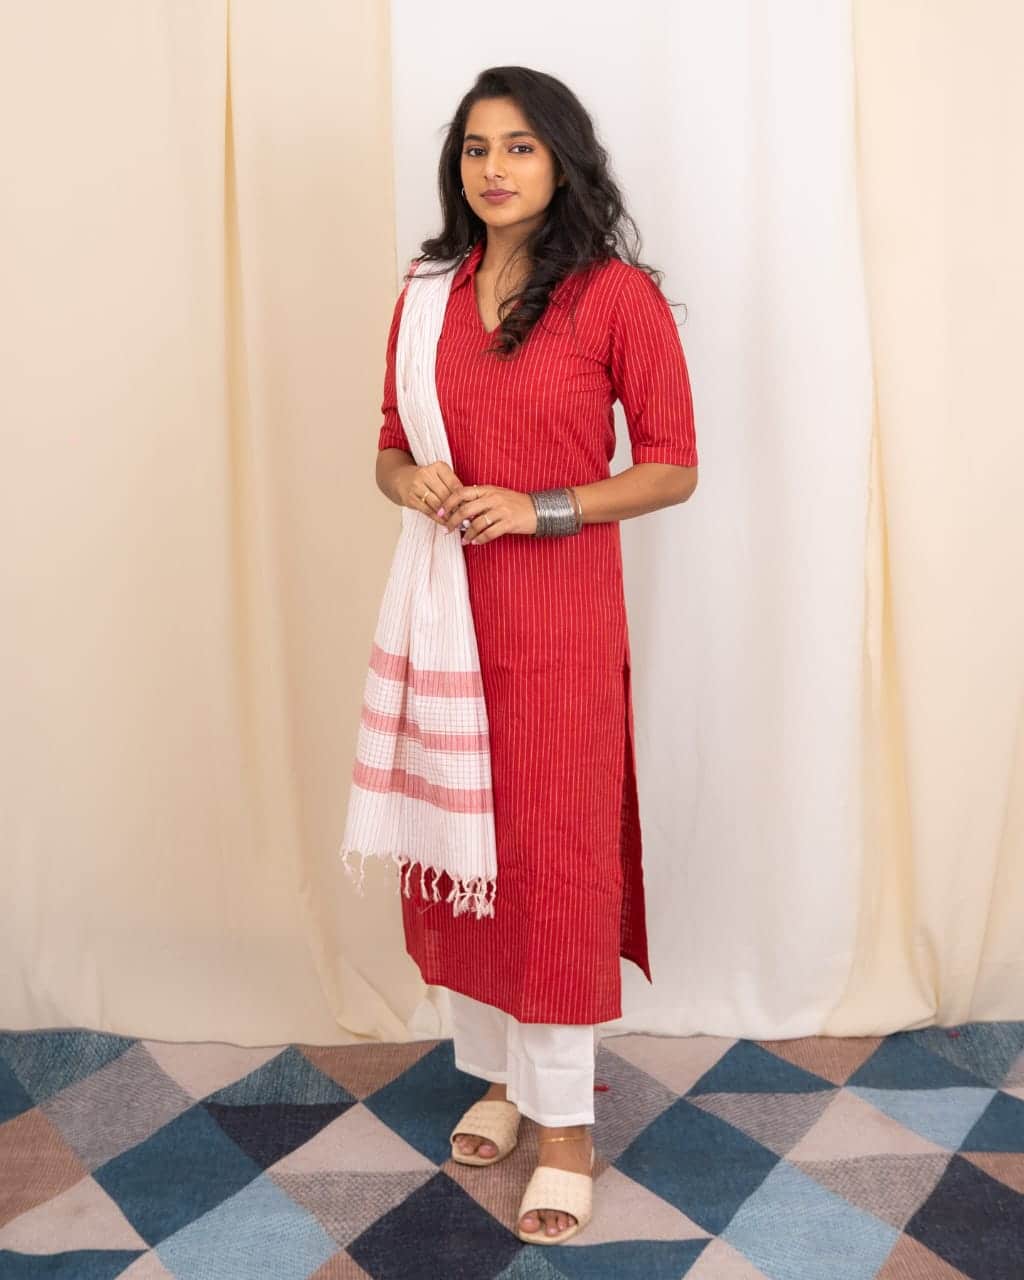 Tanya - Handloom cotton suit set in red and white with  handloom cotton dupatta